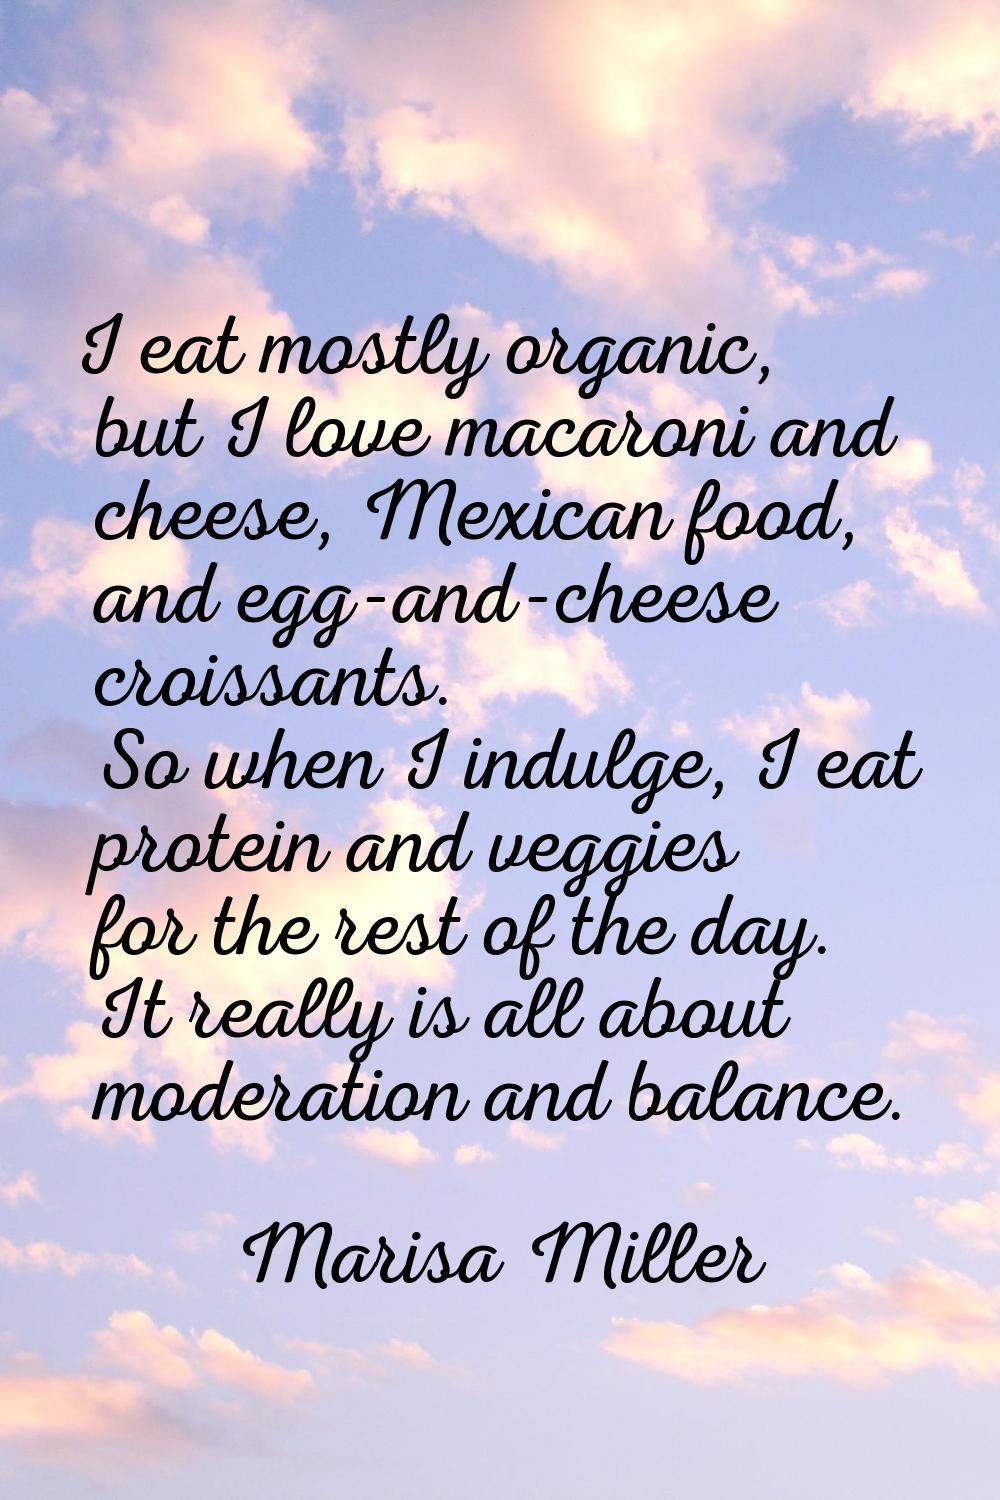 I eat mostly organic, but I love macaroni and cheese, Mexican food, and egg-and-cheese croissants. 